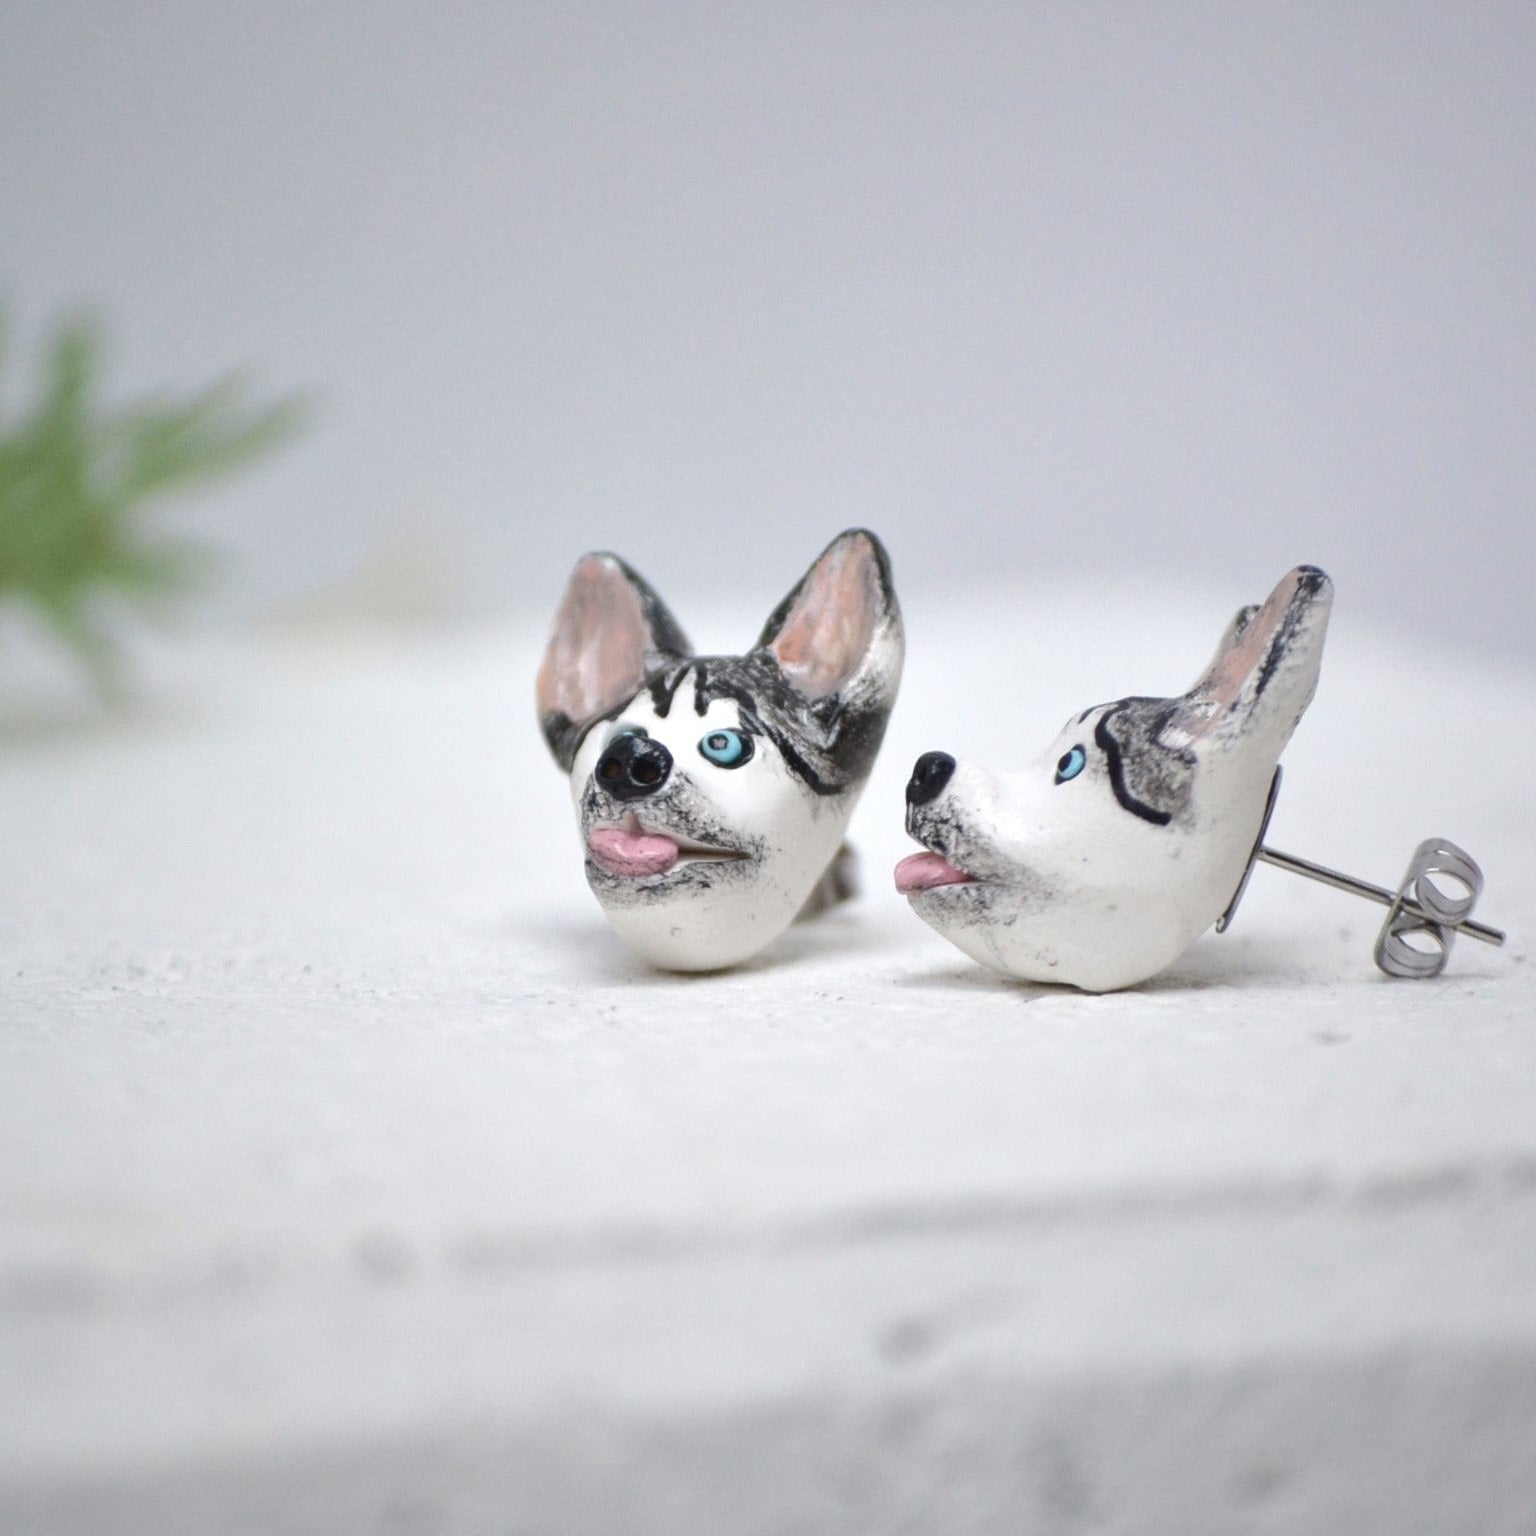 Handmade husky stud earrings by Pawfect Love, positioned on white paver